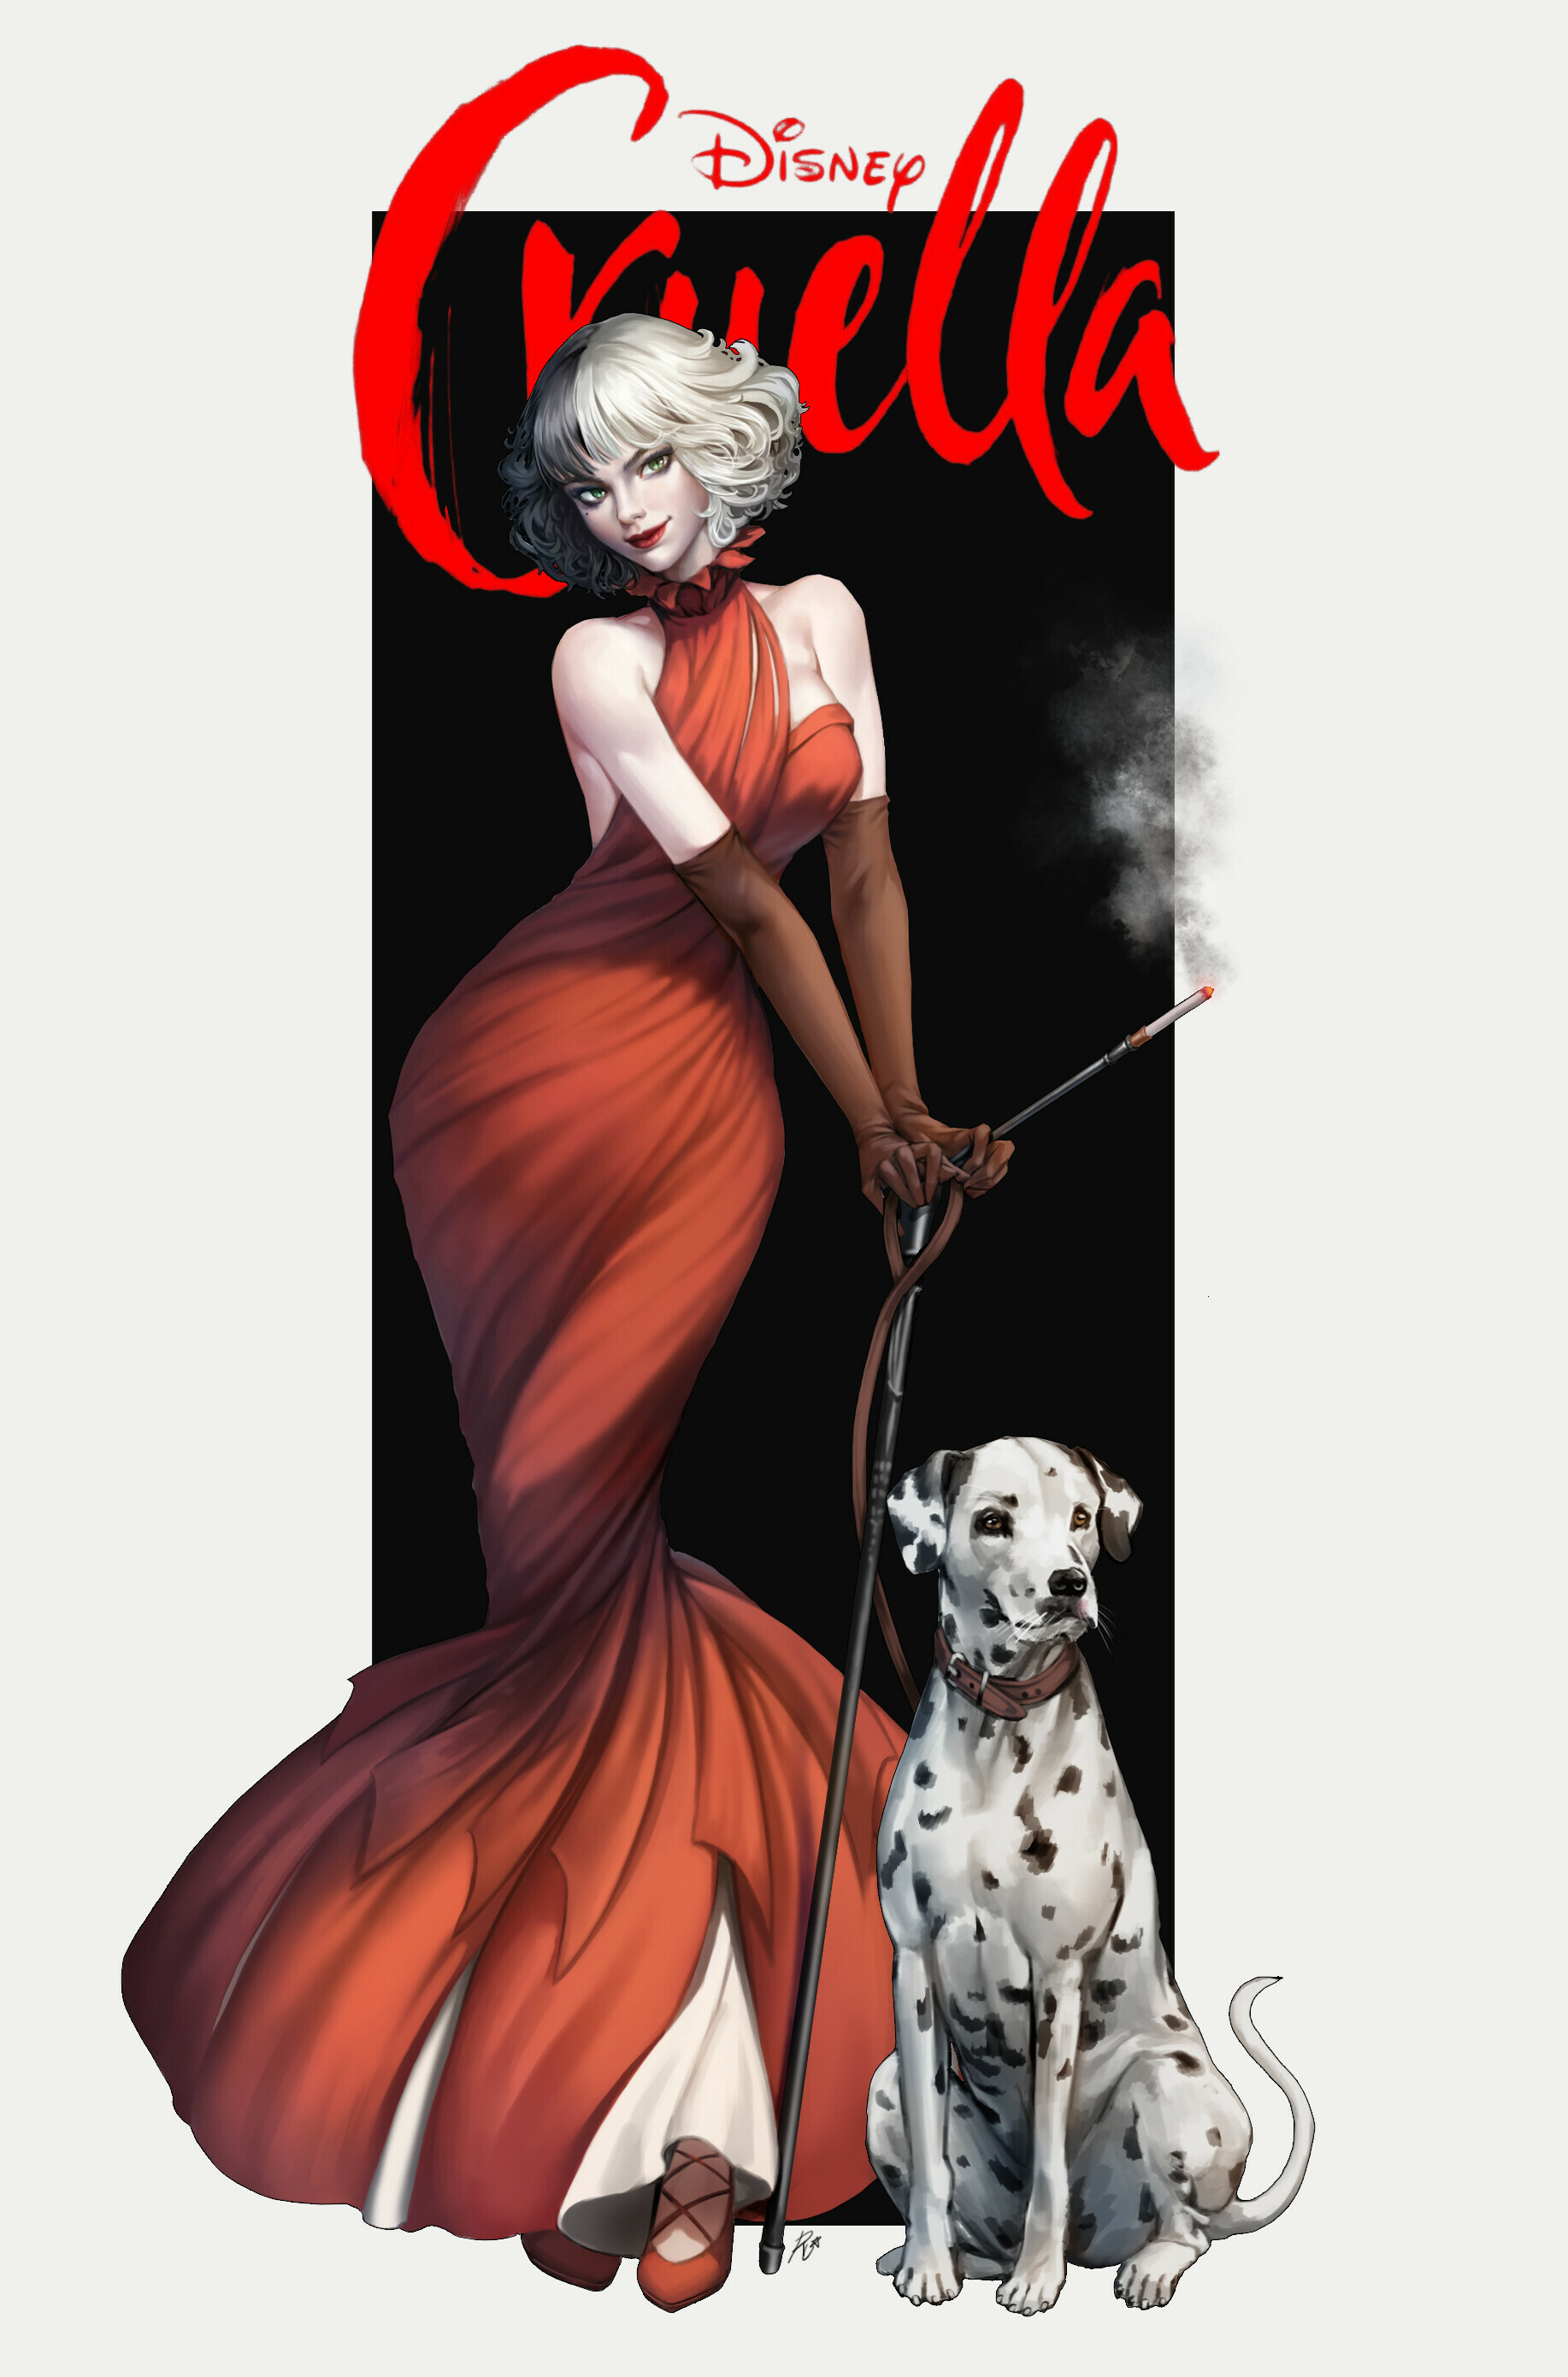 Cruella (2021): An ambitious grifter and aspiring fashion designer, who goes on to become a notorious and dangerous criminal, Art. 1840x2780 HD Background.